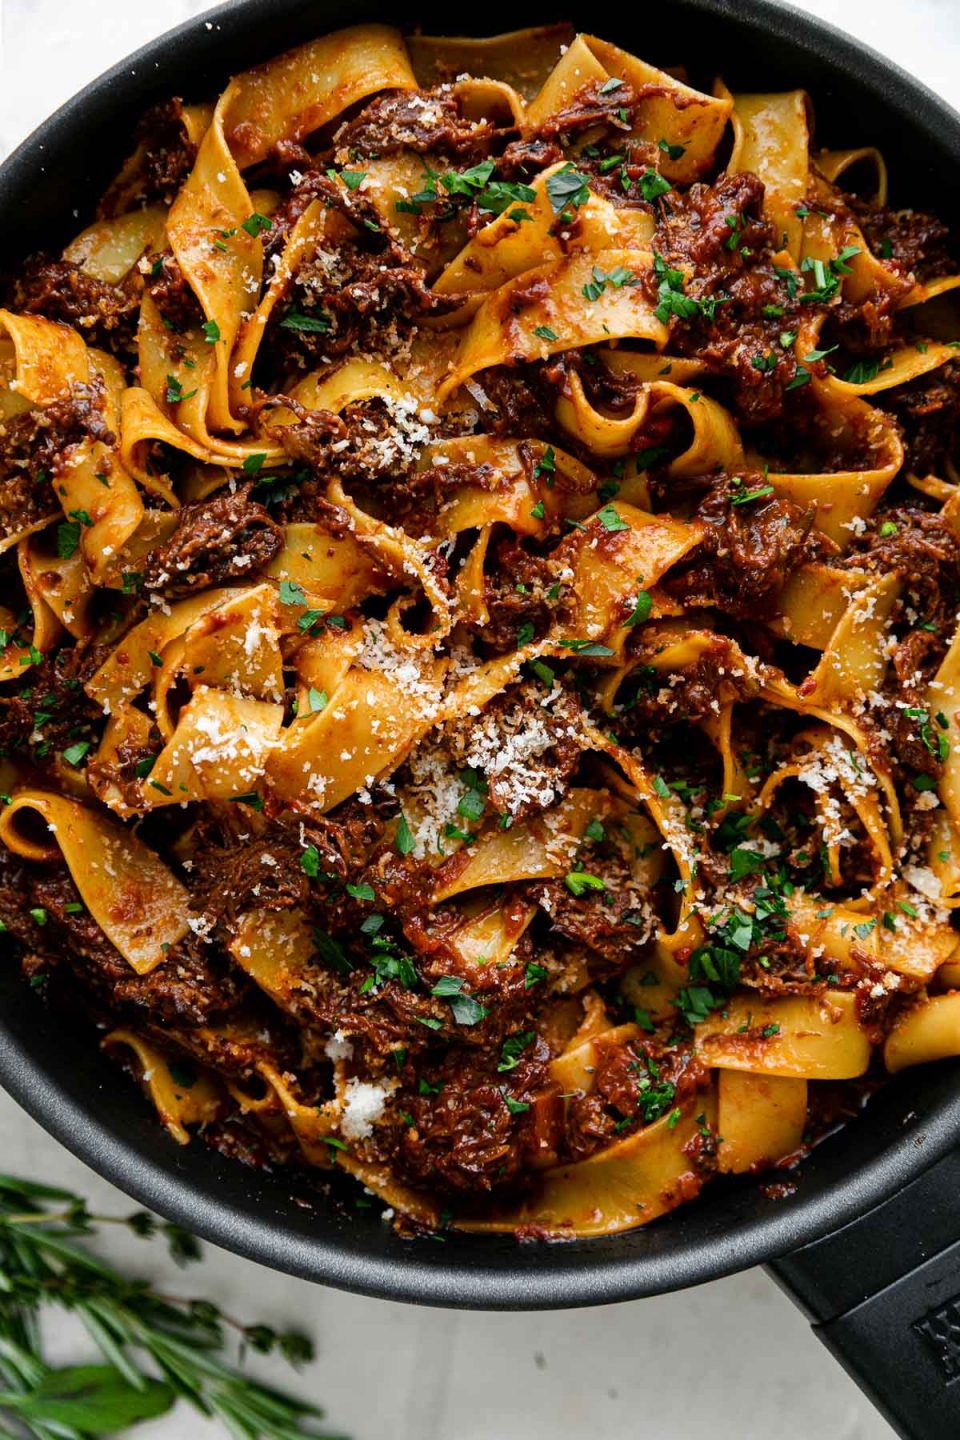 Beef short rib ragu pappardelle in a small skillet atop a light creamy textured surface. The ragu is topped with freshly grated parmesan & chopped herbs. A few sprigs of fresh herbs rest on the surface alongside the skillet.